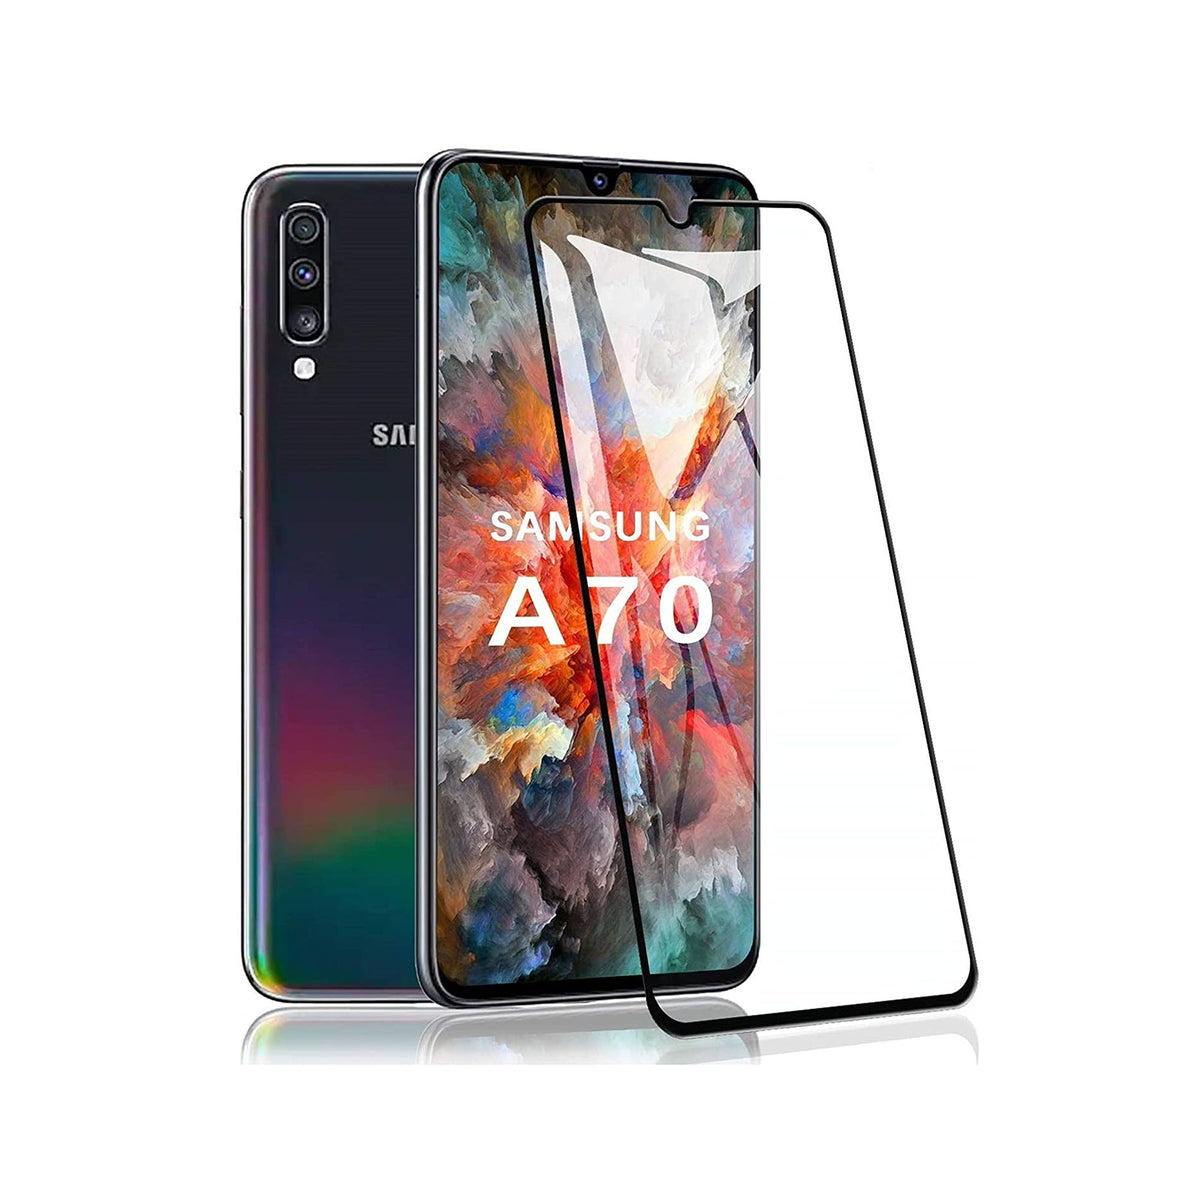 TEMPERED GLASS FOR SAMSUNG GALAXY A70 & A70S